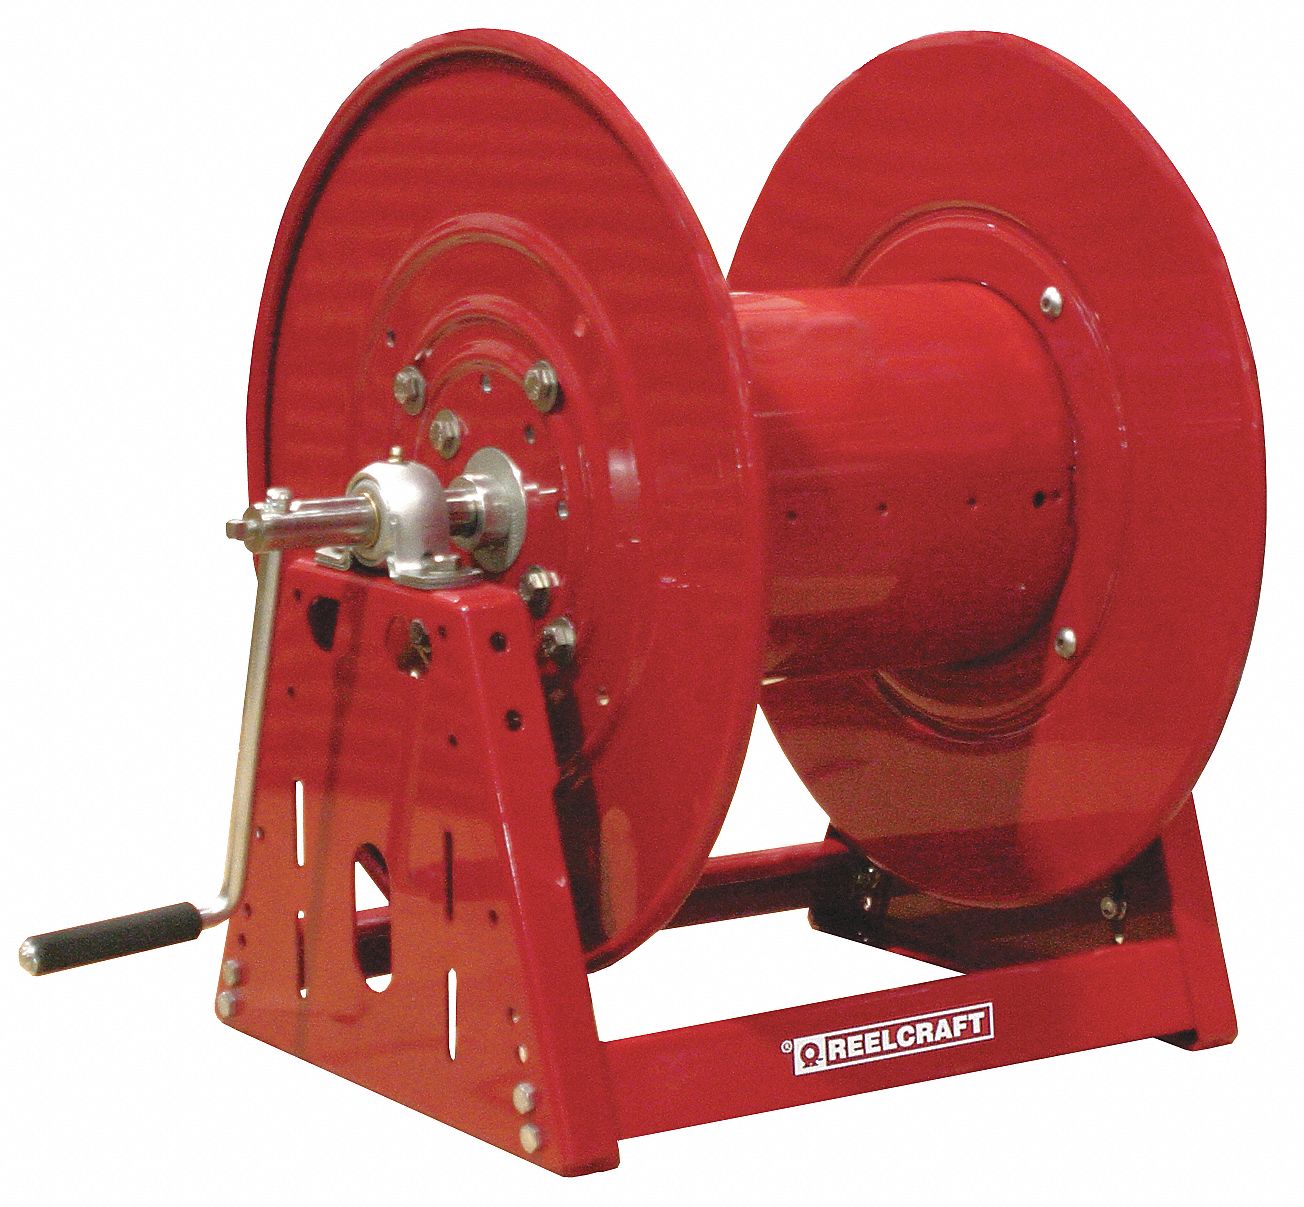 REELCRAFT HOSE REEL,1 IN ID X 105 FT,3000 PSI - Hand Crank Hose